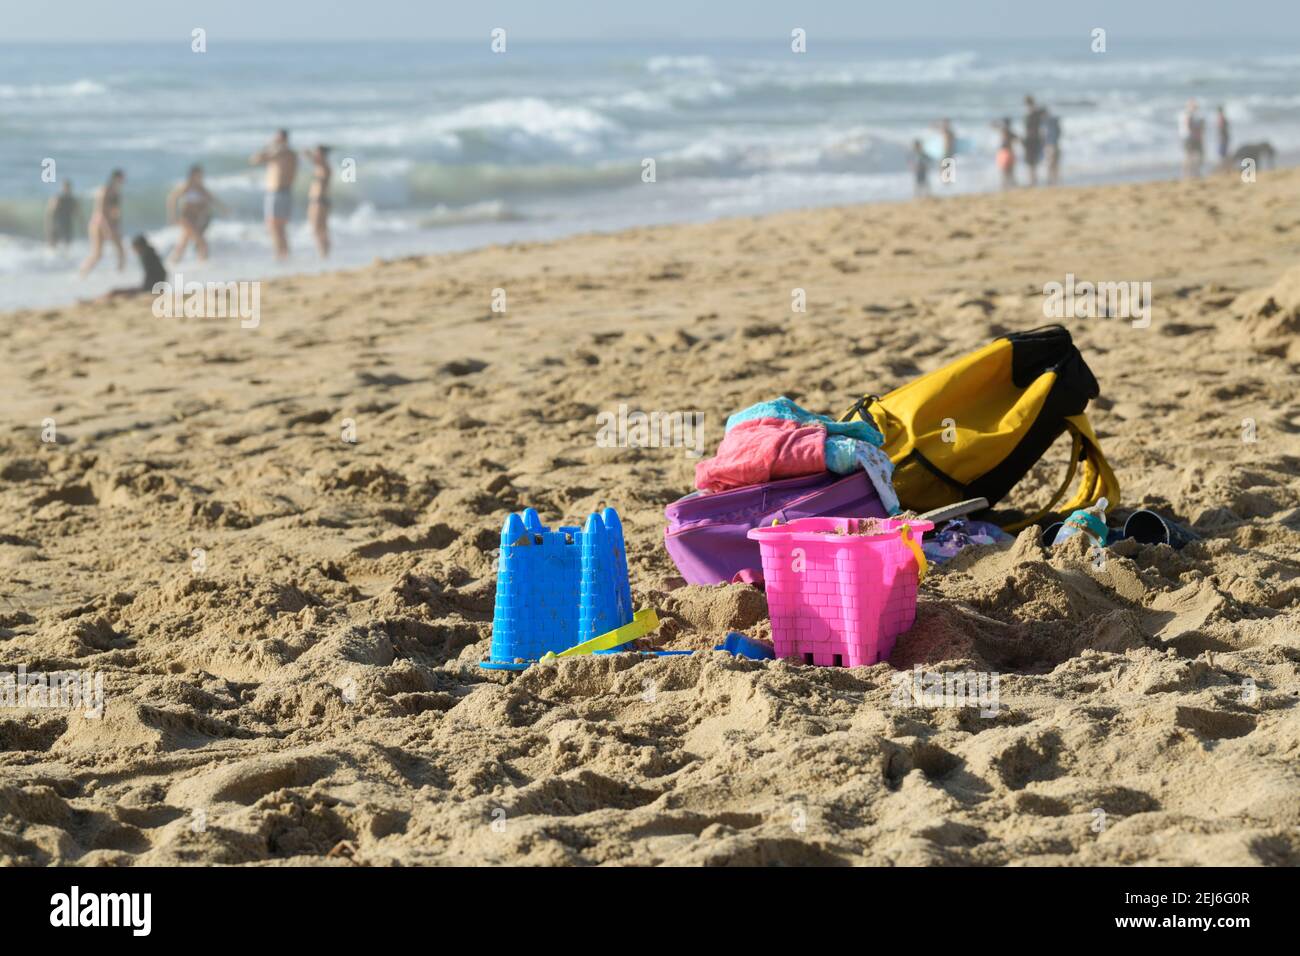 Child beach toys, still life, summer holiday, bucket, objects, seaside vacation, Durban, South Africa, things, backgrounds, accessories, collection Stock Photo